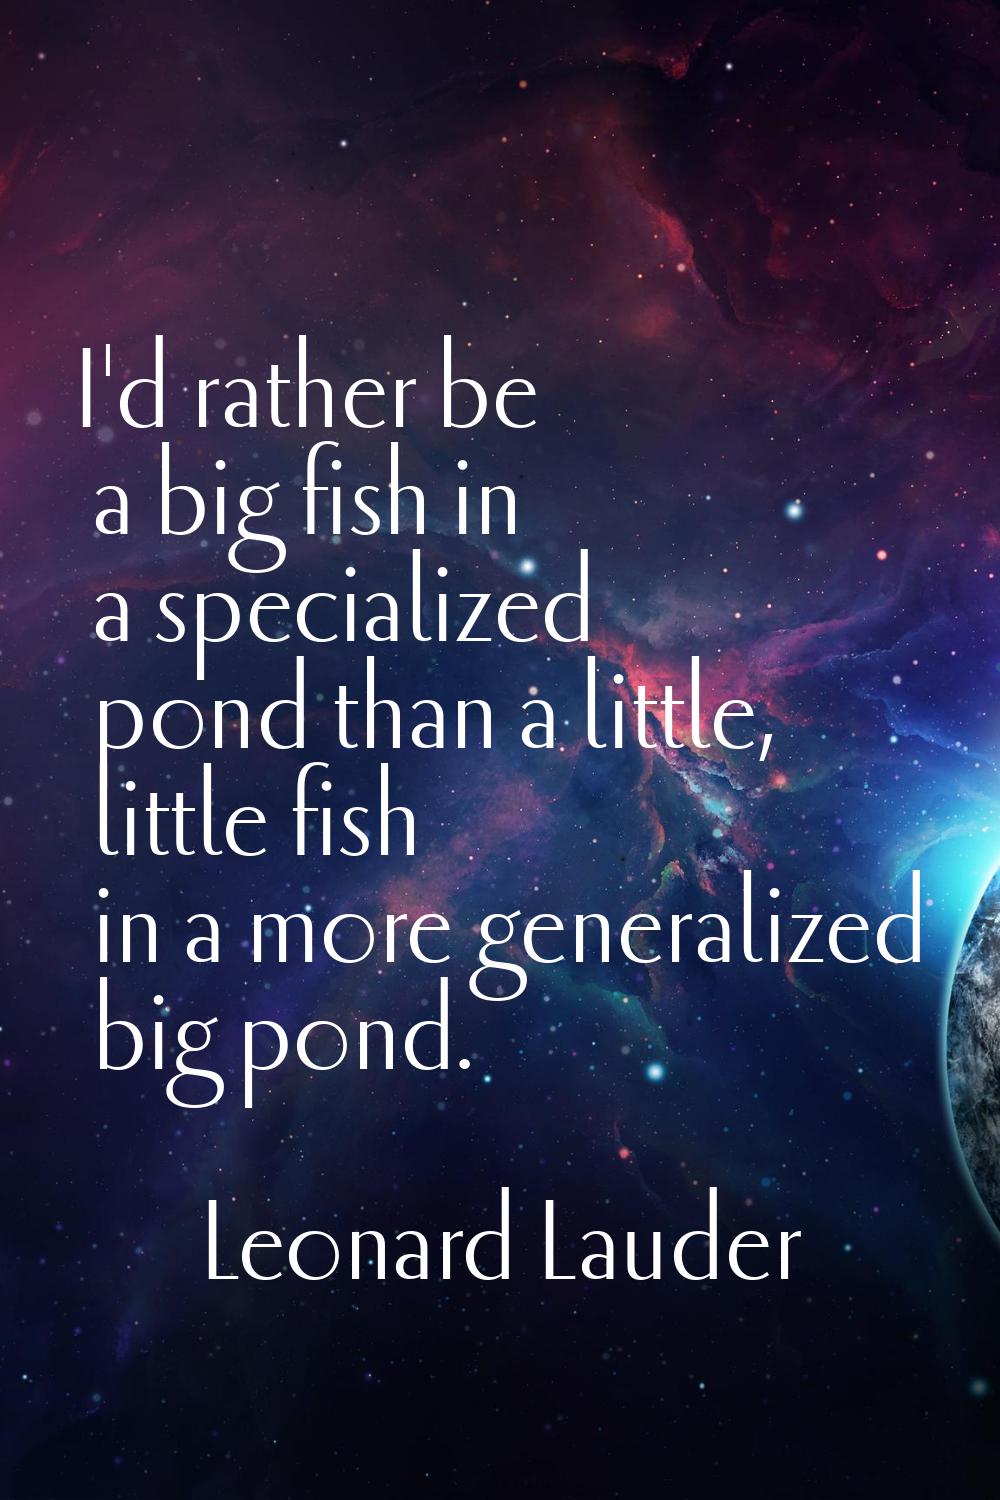 I'd rather be a big fish in a specialized pond than a little, little fish in a more generalized big